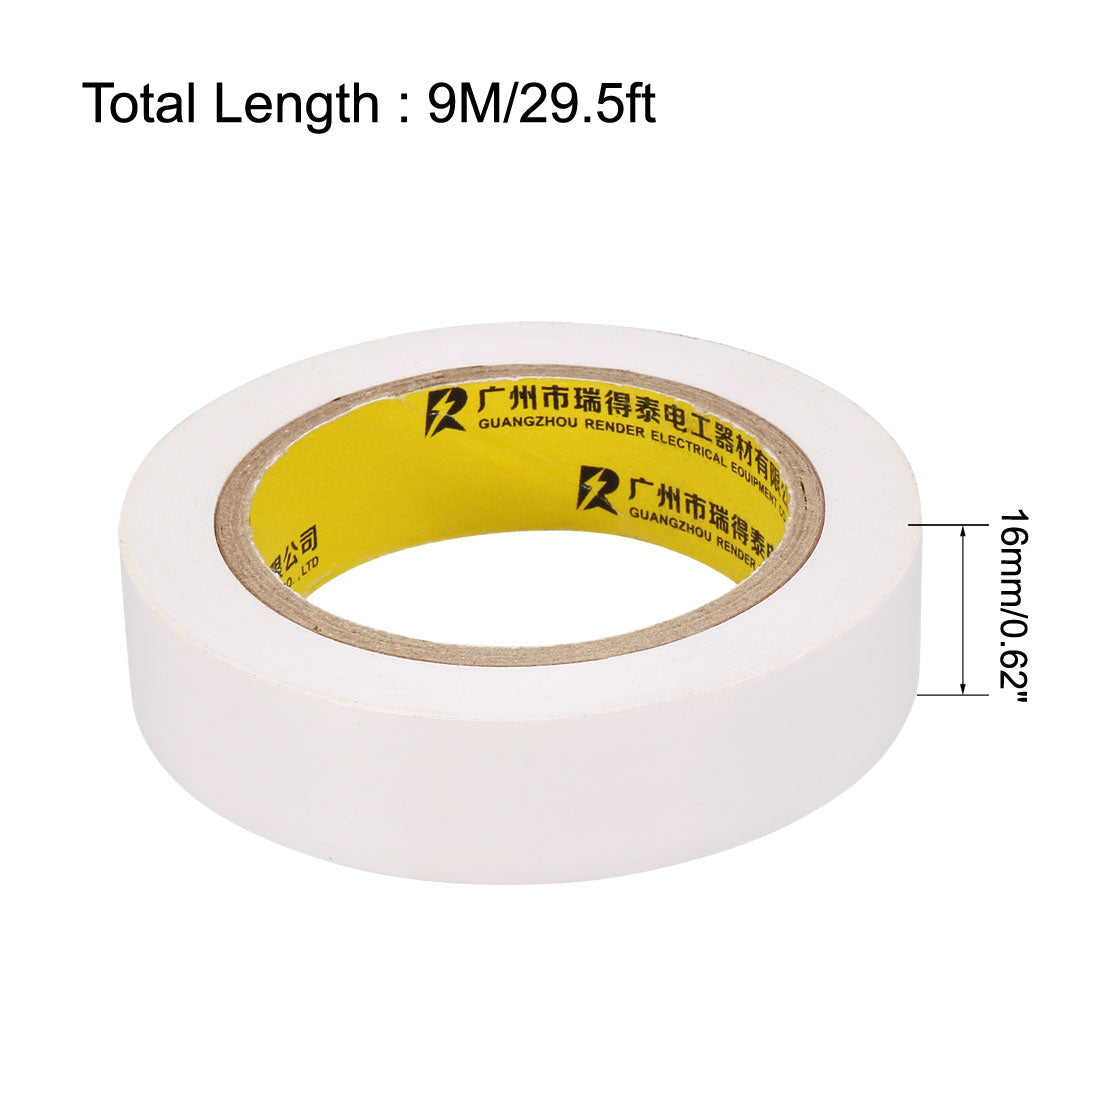 uxcell Uxcell Insulating Tape 16mm Width 9M Long 0.18mm Thick PVC Electrical Tape White 2pcs